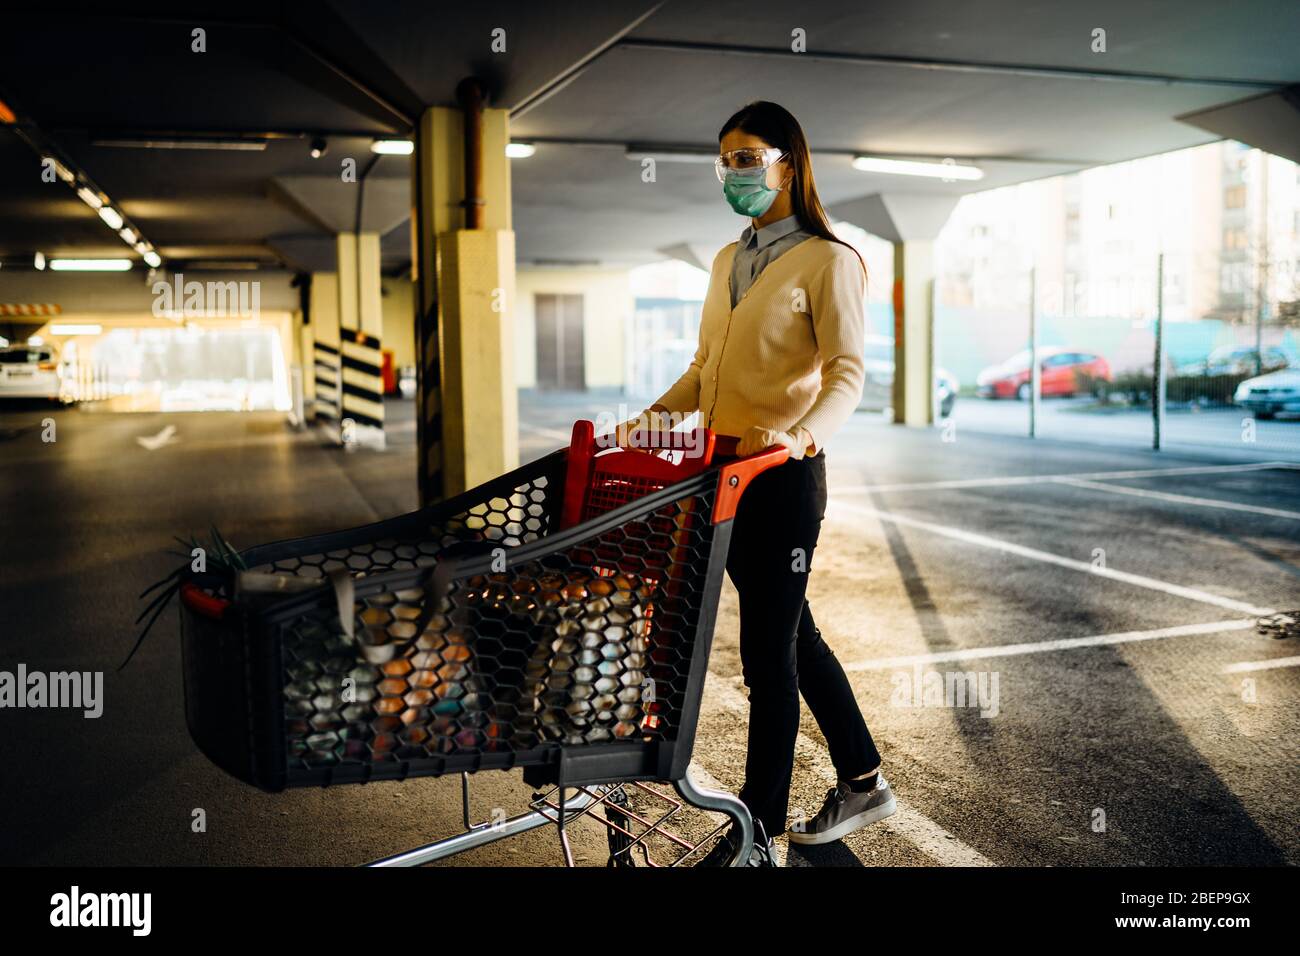 Woman wearing mask groceries/supplies shopping in supermarket,pushing trolley.Food supplies shortage.Panic buying and hoarding.Empty parking garage.Su Stock Photo